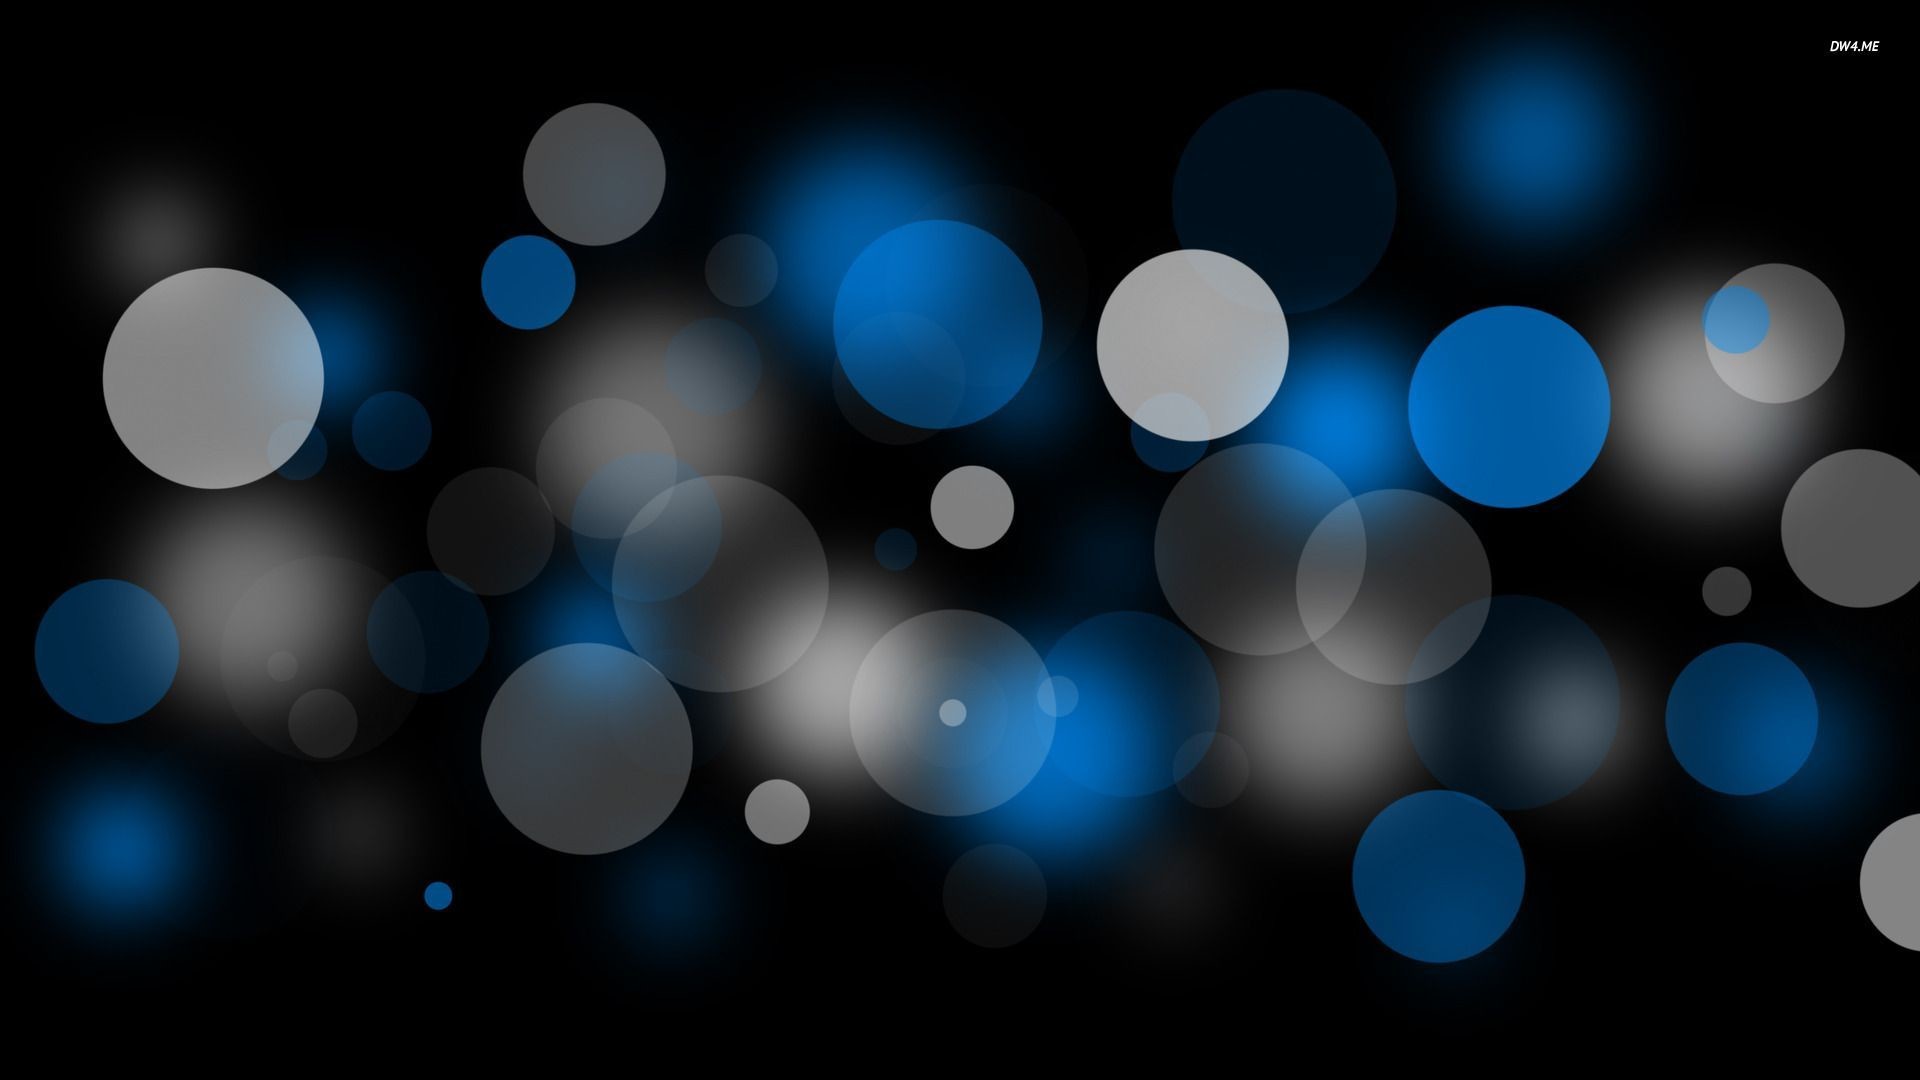 1920x1080 Blue and white bubbles wallpaper - Abstract wallpapers - #805